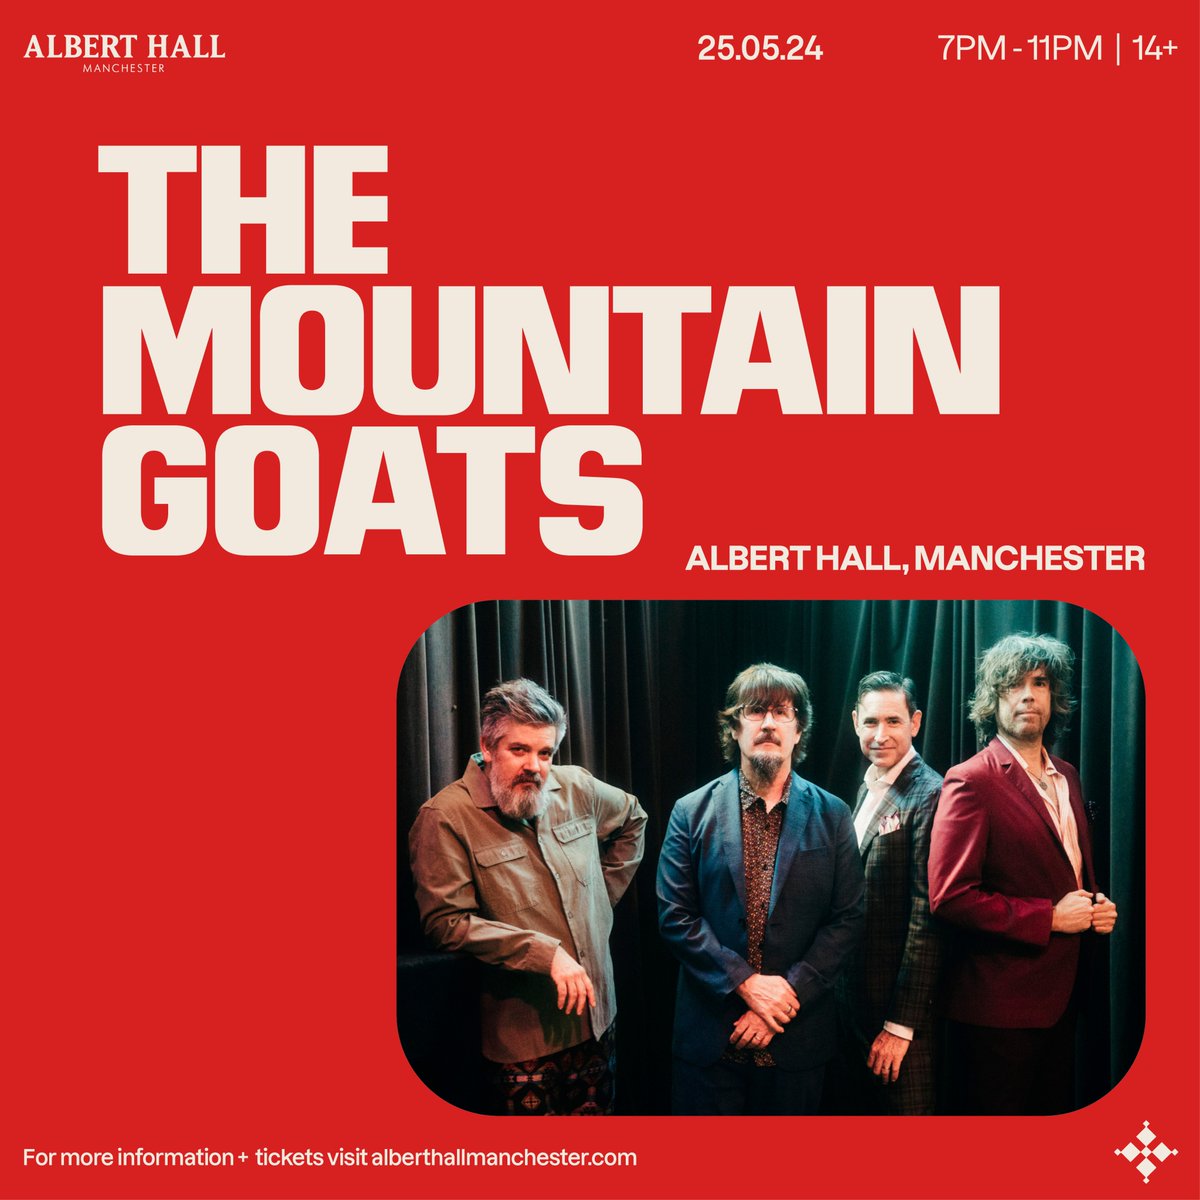 ON SALE NOW: On the 25th of May next year, the @mountain_goats are making a very welcome return to our stage, equipped with their incredible new, genre-meddling album Jenny from Thebes! Tickets: tinyurl.com/5svzhnyb